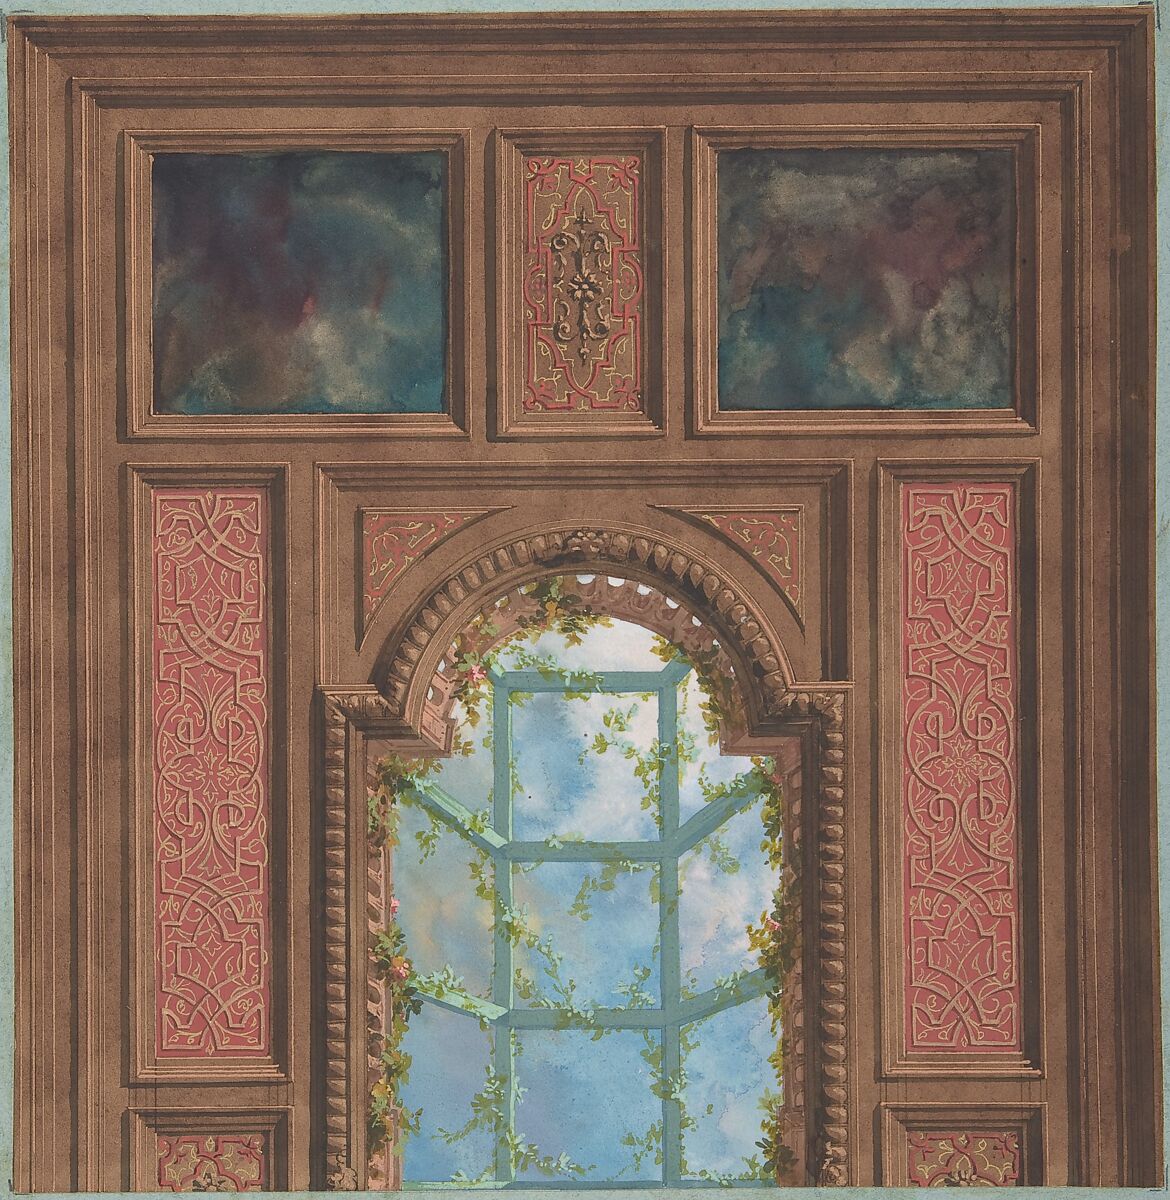 Design for Coffered Ceiling, Jules-Edmond-Charles Lachaise (French, died 1897), Pen and brown ink, watercolor, gouache, and gilt 